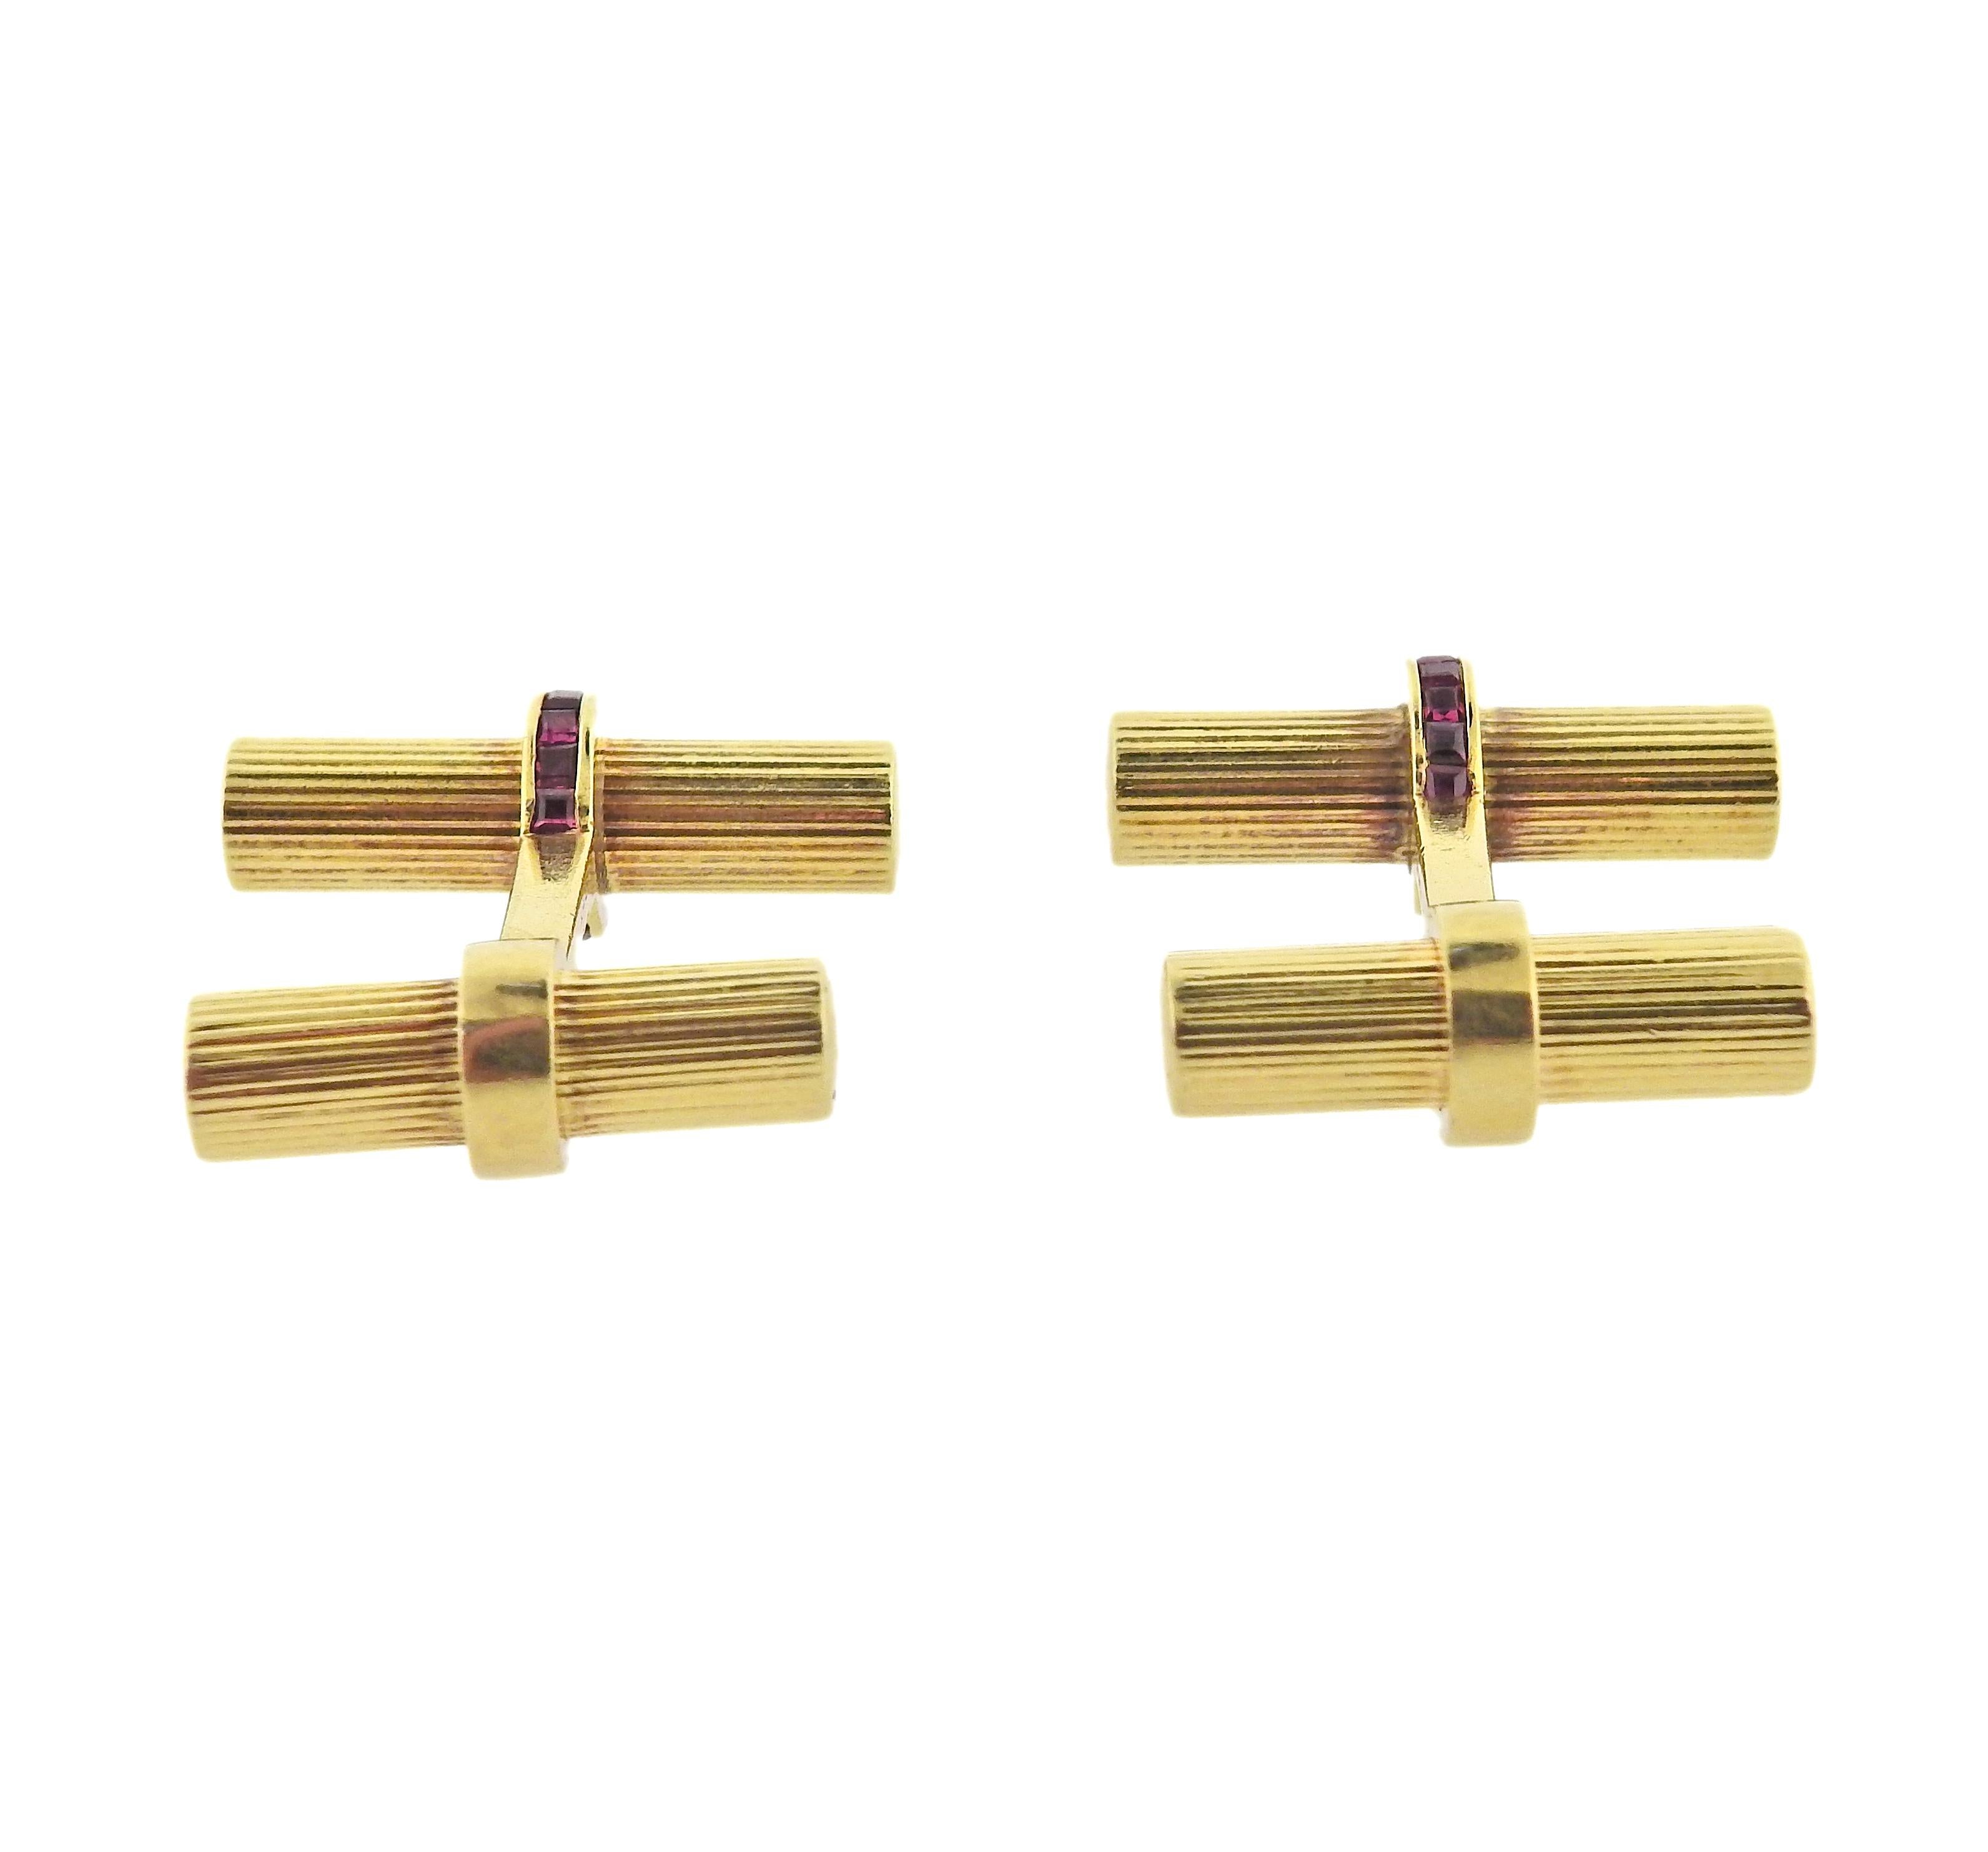 Pair of midcentury Tiffany & Co bar 18k gold cufflinks with rubies. Cufflink top is 23mm x 10mm. Weight - 19.6 grams. Marked: Tiffany & Co, 750. 